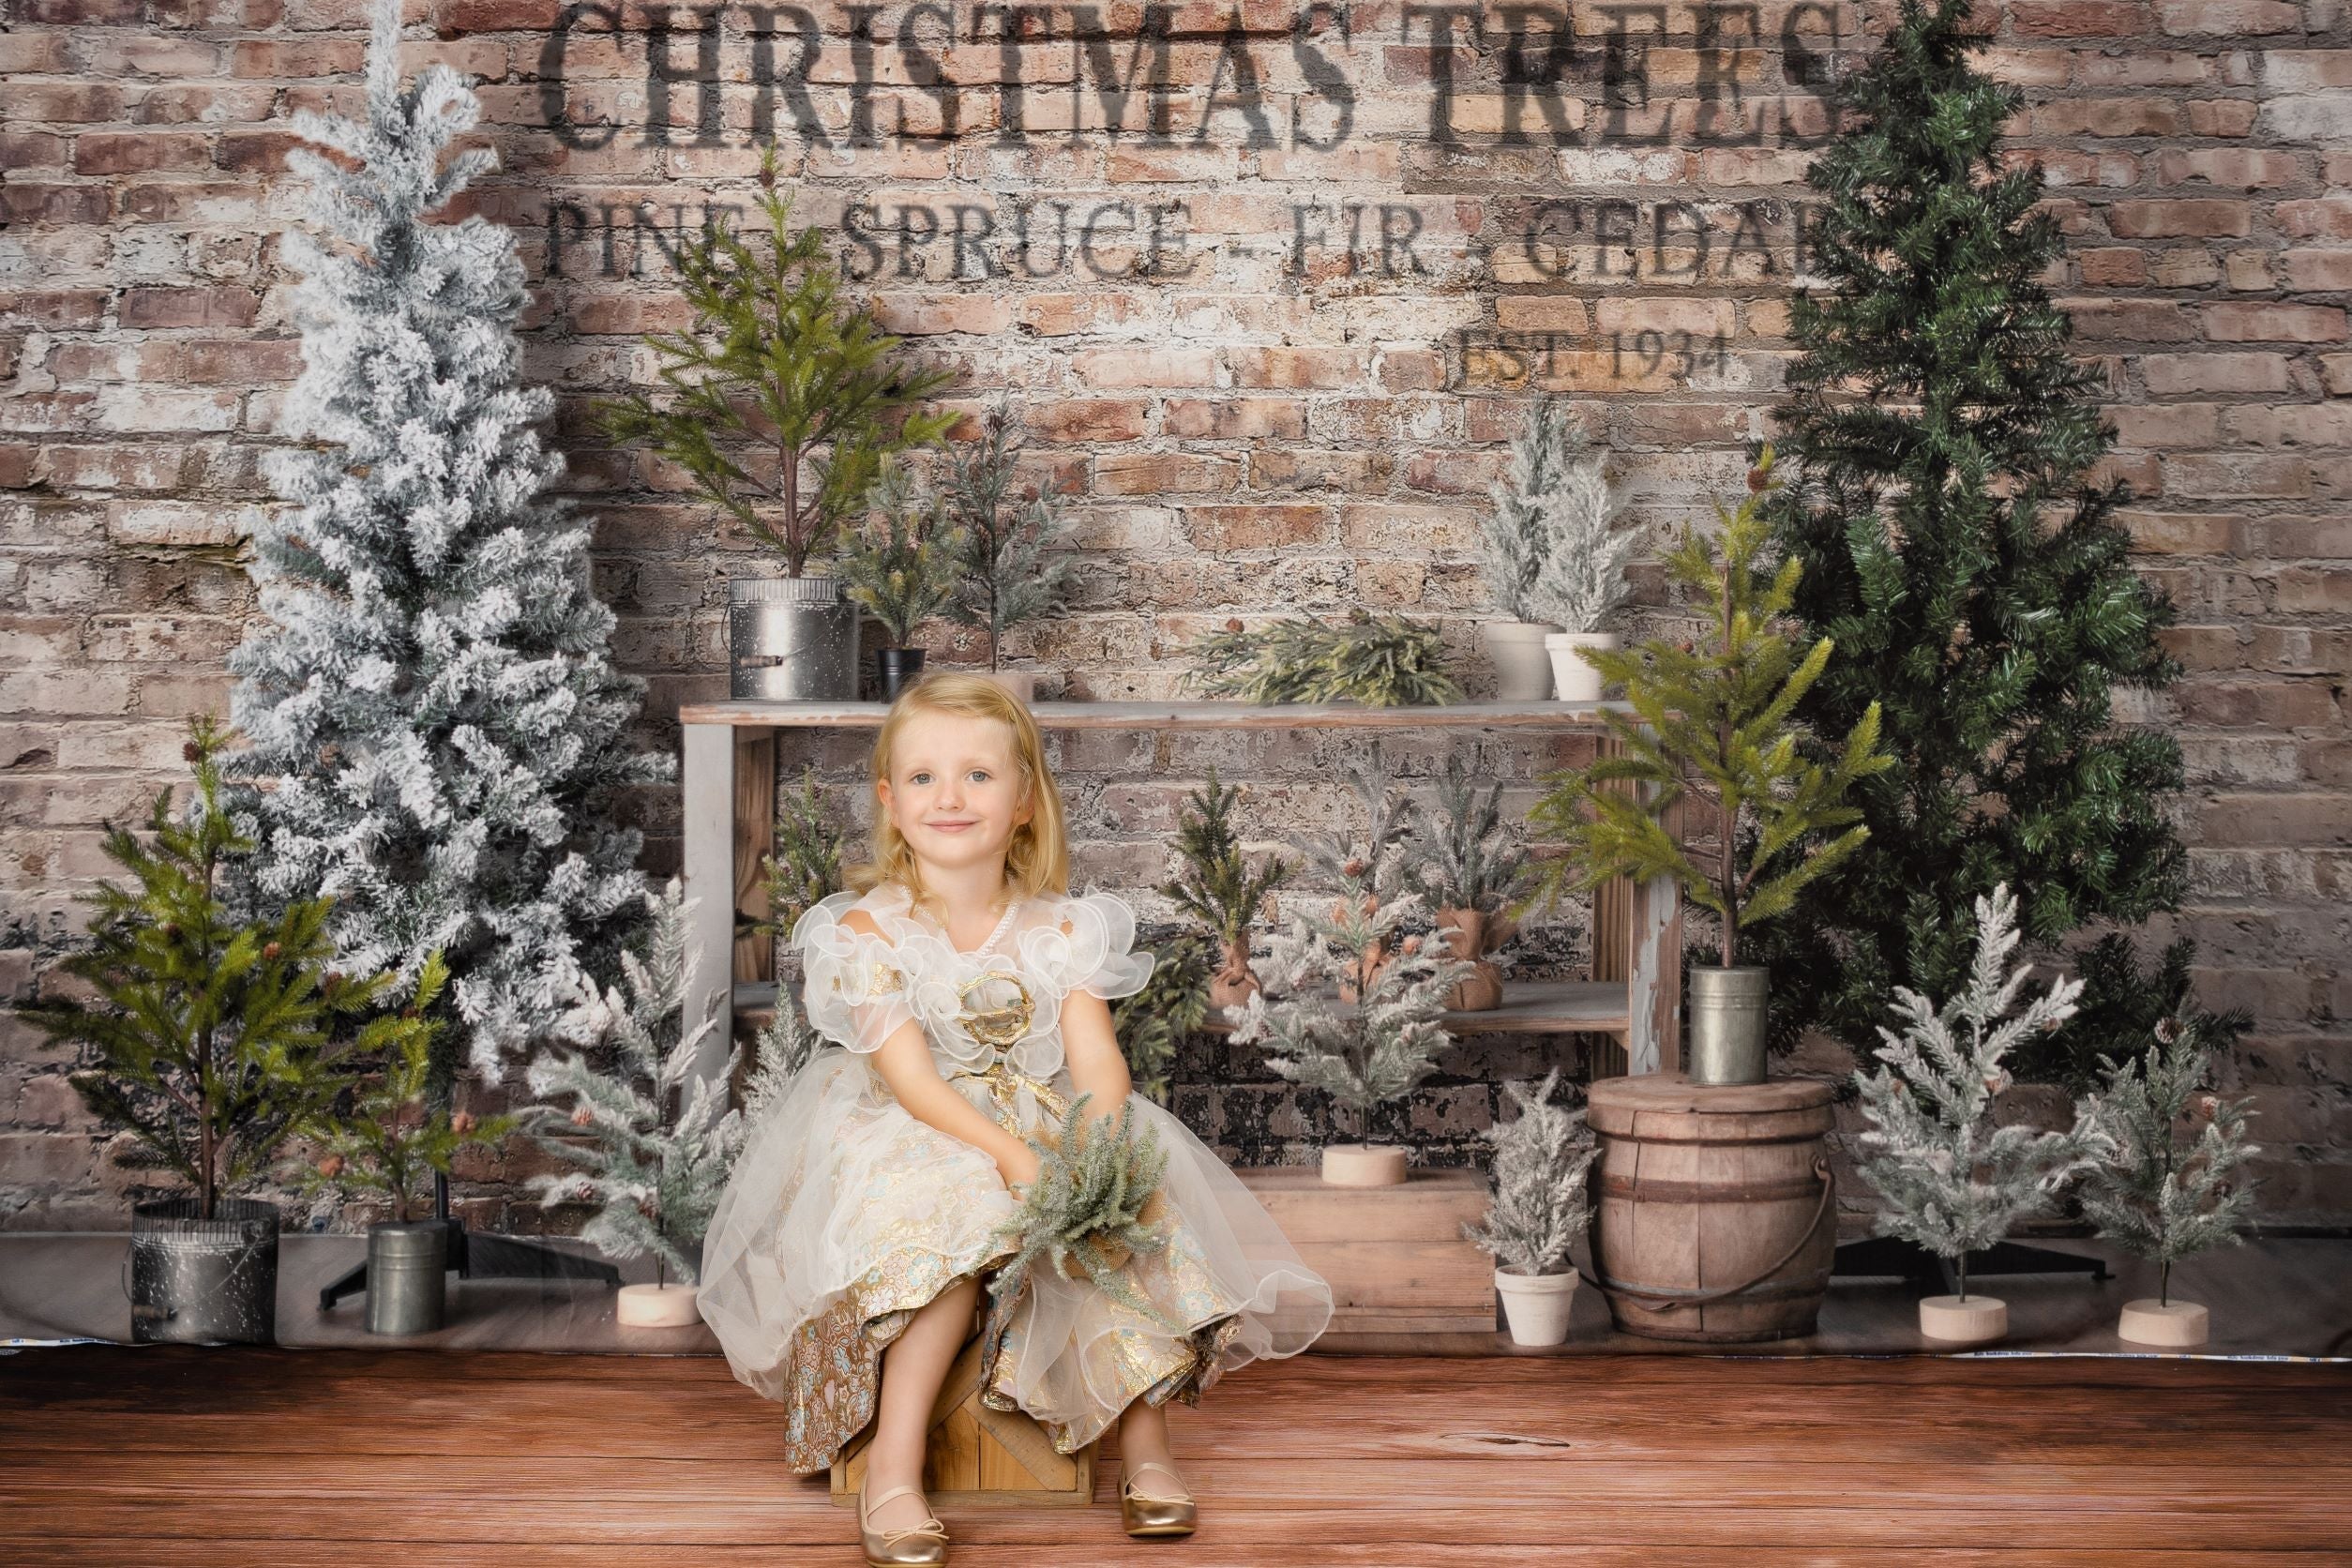 Kate Christmas Farm Fresh Tree Backdrop Designed by Mandy Ringe Photography (only ship to Canada)